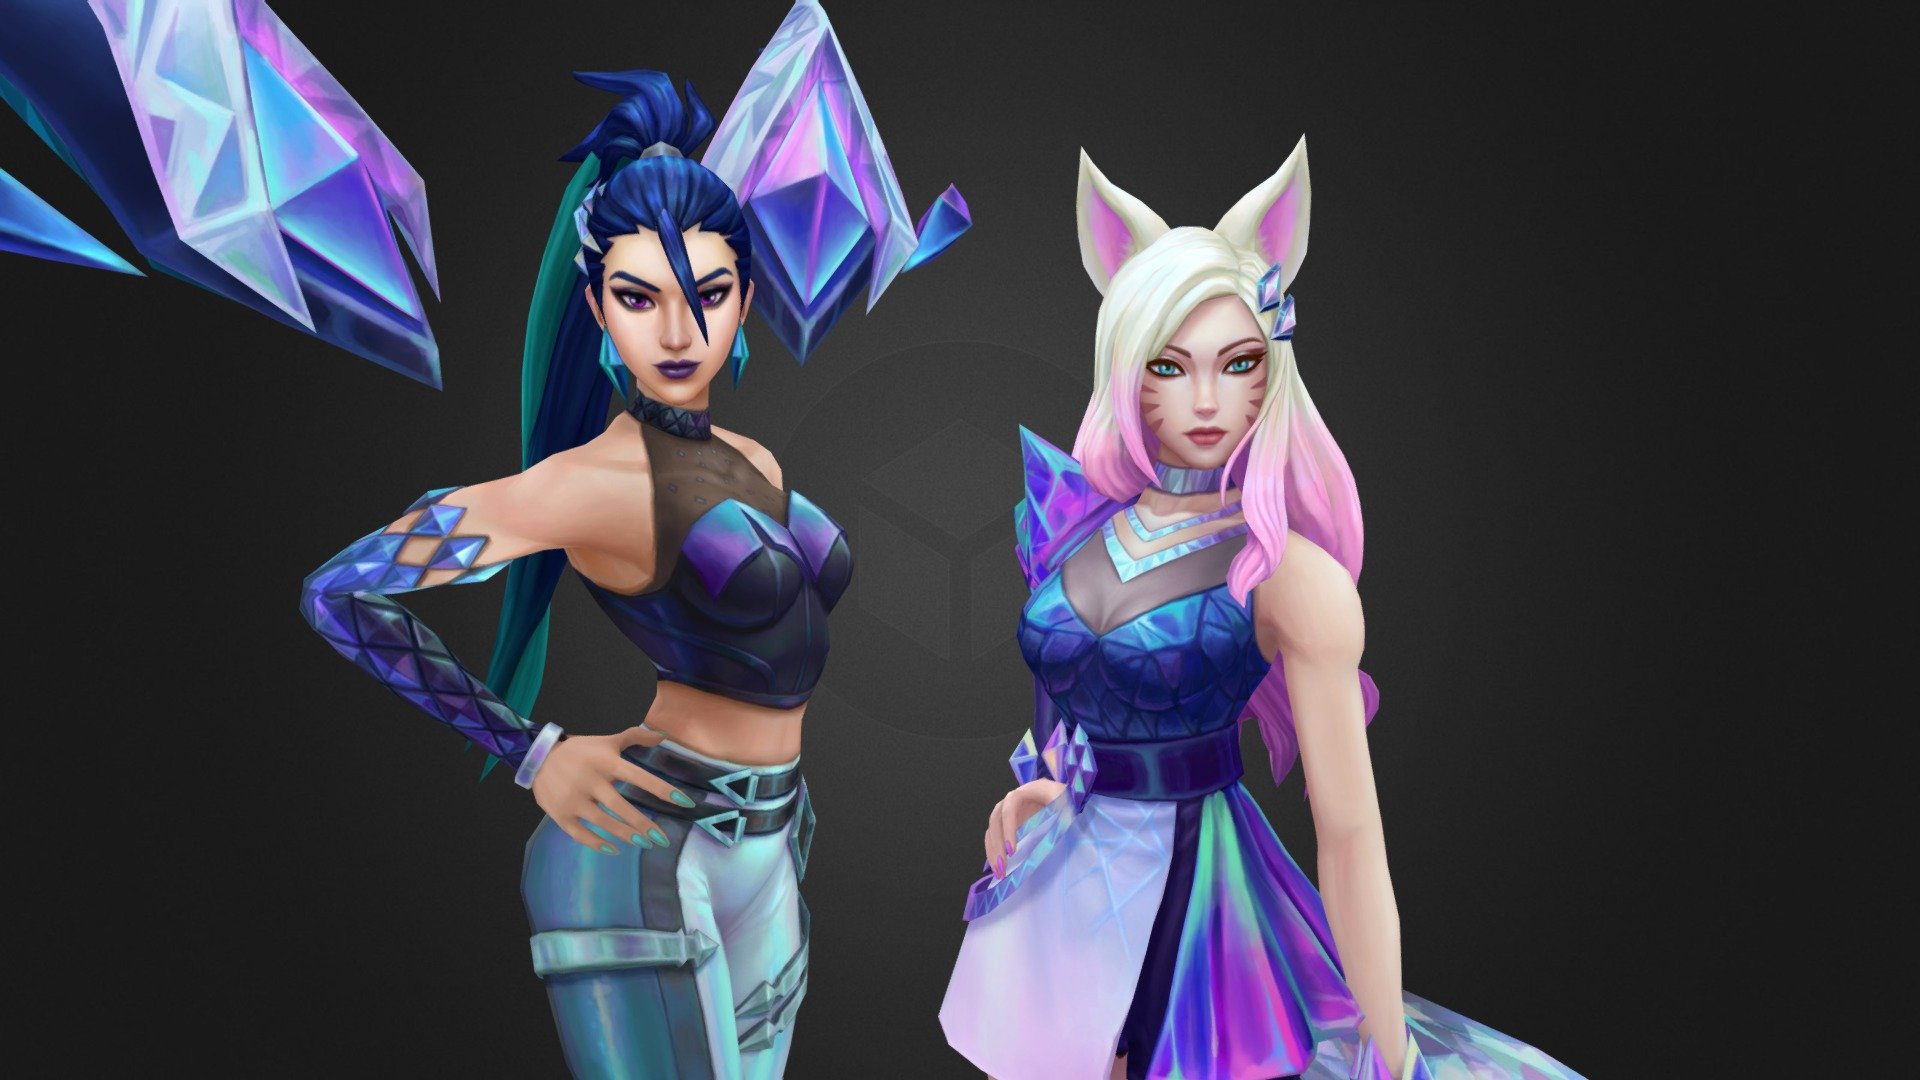 Had the honor of working on K/DA ALL OUT Kai'sa and Ahri.   These are the in game 3D models for League of Legends.  These projects were a huge collaborative effort and a dream come true to work on.  HUGE thank you and congrats to the team and all the amazing people who worked on these skins and events! ❤ Hope you enjoy the show! ^_^- 
(More screenshots can be found here!) 
https://www.artstation.com/artwork/q9NNWR 

https://www.artstation.com/artwork/ELZgdq 
(Ahri's tail painted diffuse for model viewer!)

Kai'sa Concept: Nancy Kim
https://www.artstation.com/nkim
Ahri Concept: Rheekyo Lee
https://www.artstation.com/artwork/oAz1nL
Animation: Einar Langfjord
https://www.artstation.com/pelican
VFX: Walker Paulsen
https://www.artstation.com/cyan_fox
Tech Art: Isabella Cheng-Henehan
https://www.artstation.com/izzyccheng
Audio: Rachel Dziezynski
Producer: Ambrielle Army
QA: Nathan Hales

Models belong to Riot Games and not available for download :) - K/DA ALL OUT Kai'sa and Ahri - 3D model by kyliejaynegage (@kyliejaynesmith) 3d model